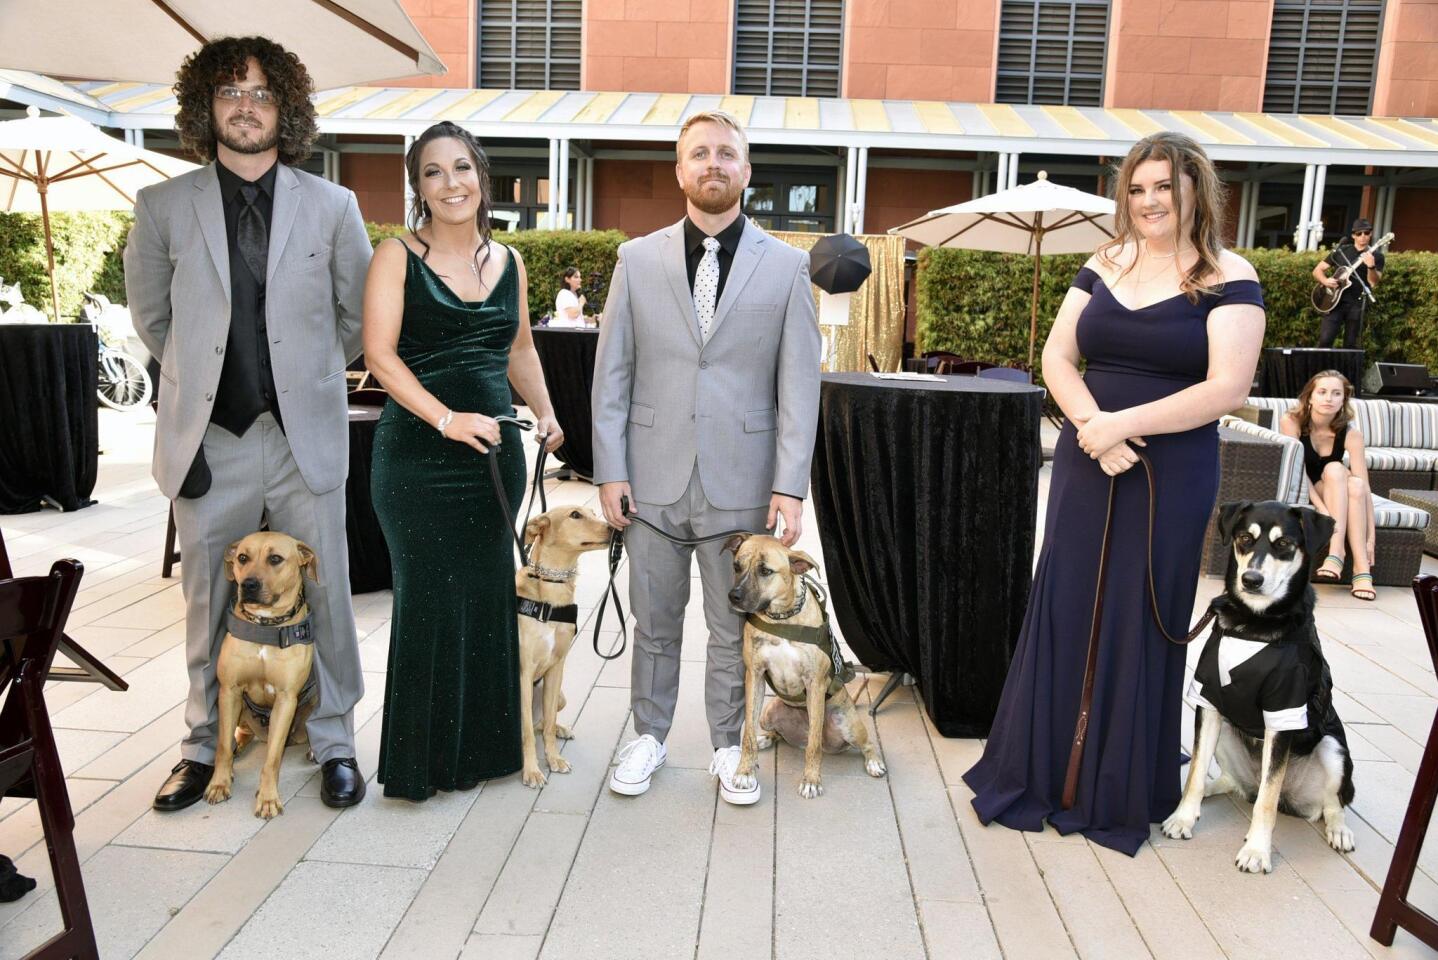 Dog trainers Vince Martell with Lola, Julie McLaughlin with Thistle, Dustin Campbell with Keeta, Alayna DeVelasco with Seth